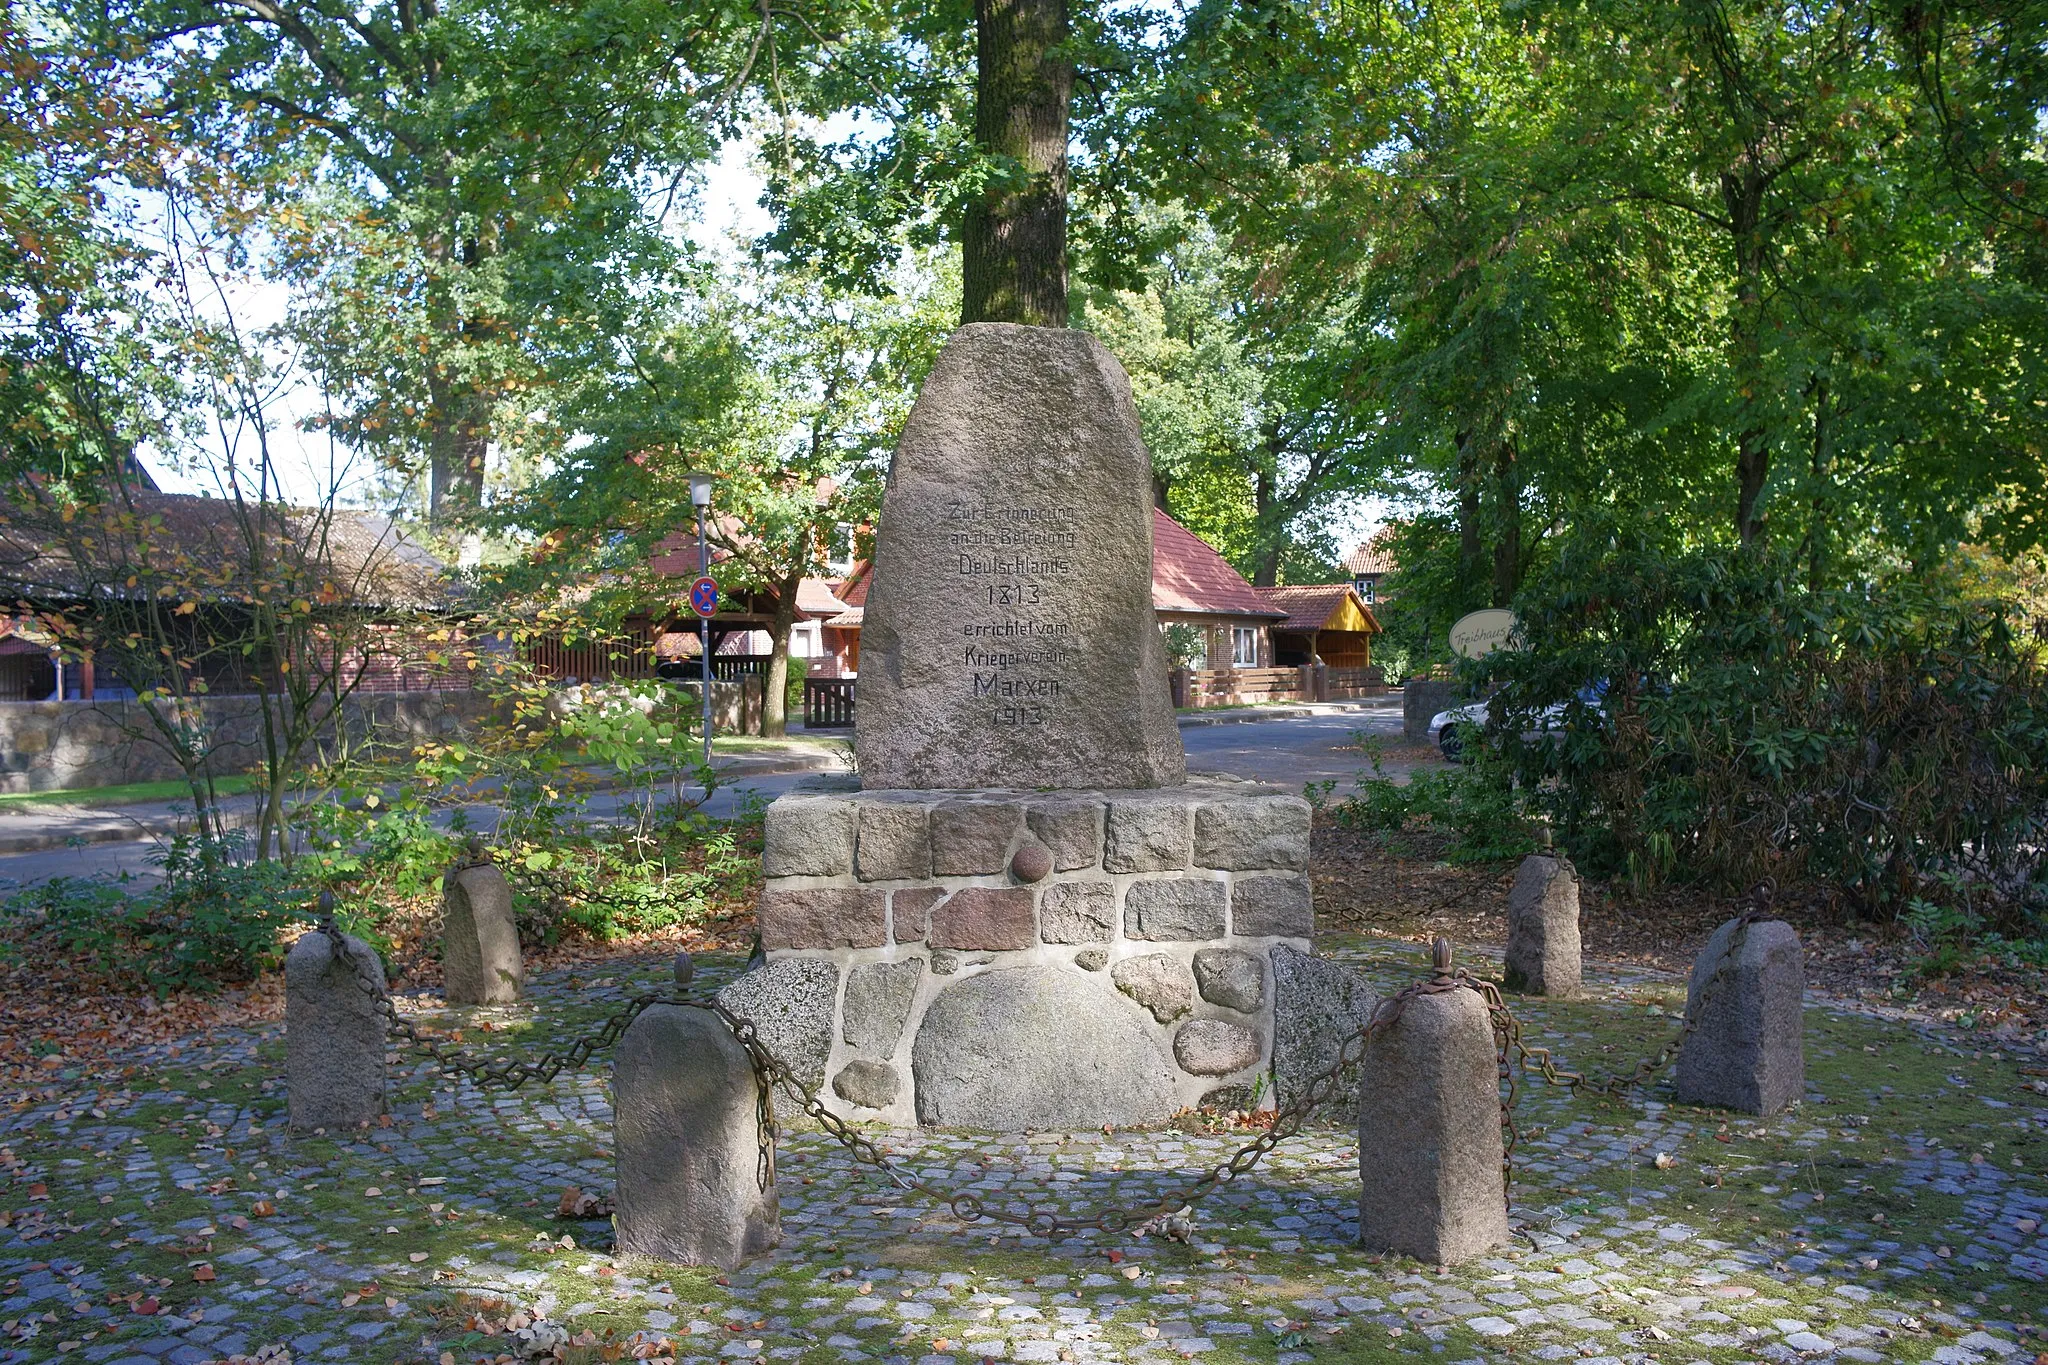 Photo showing: Memorial for the Battle of Leipzig in Marxen.
The inscription reads:
"Zur Erinnerung
an die Befreiung
Deutschlands.
1813
errichtet vom
Kriegerverein
Marxen
1913"
("Remembering the liberation of Germany. 1813
erected by the Warrior association Marxen. 1913")

In 2013 the memorial was dedicated to permanent peace in Europe by the municipality of Marxen.